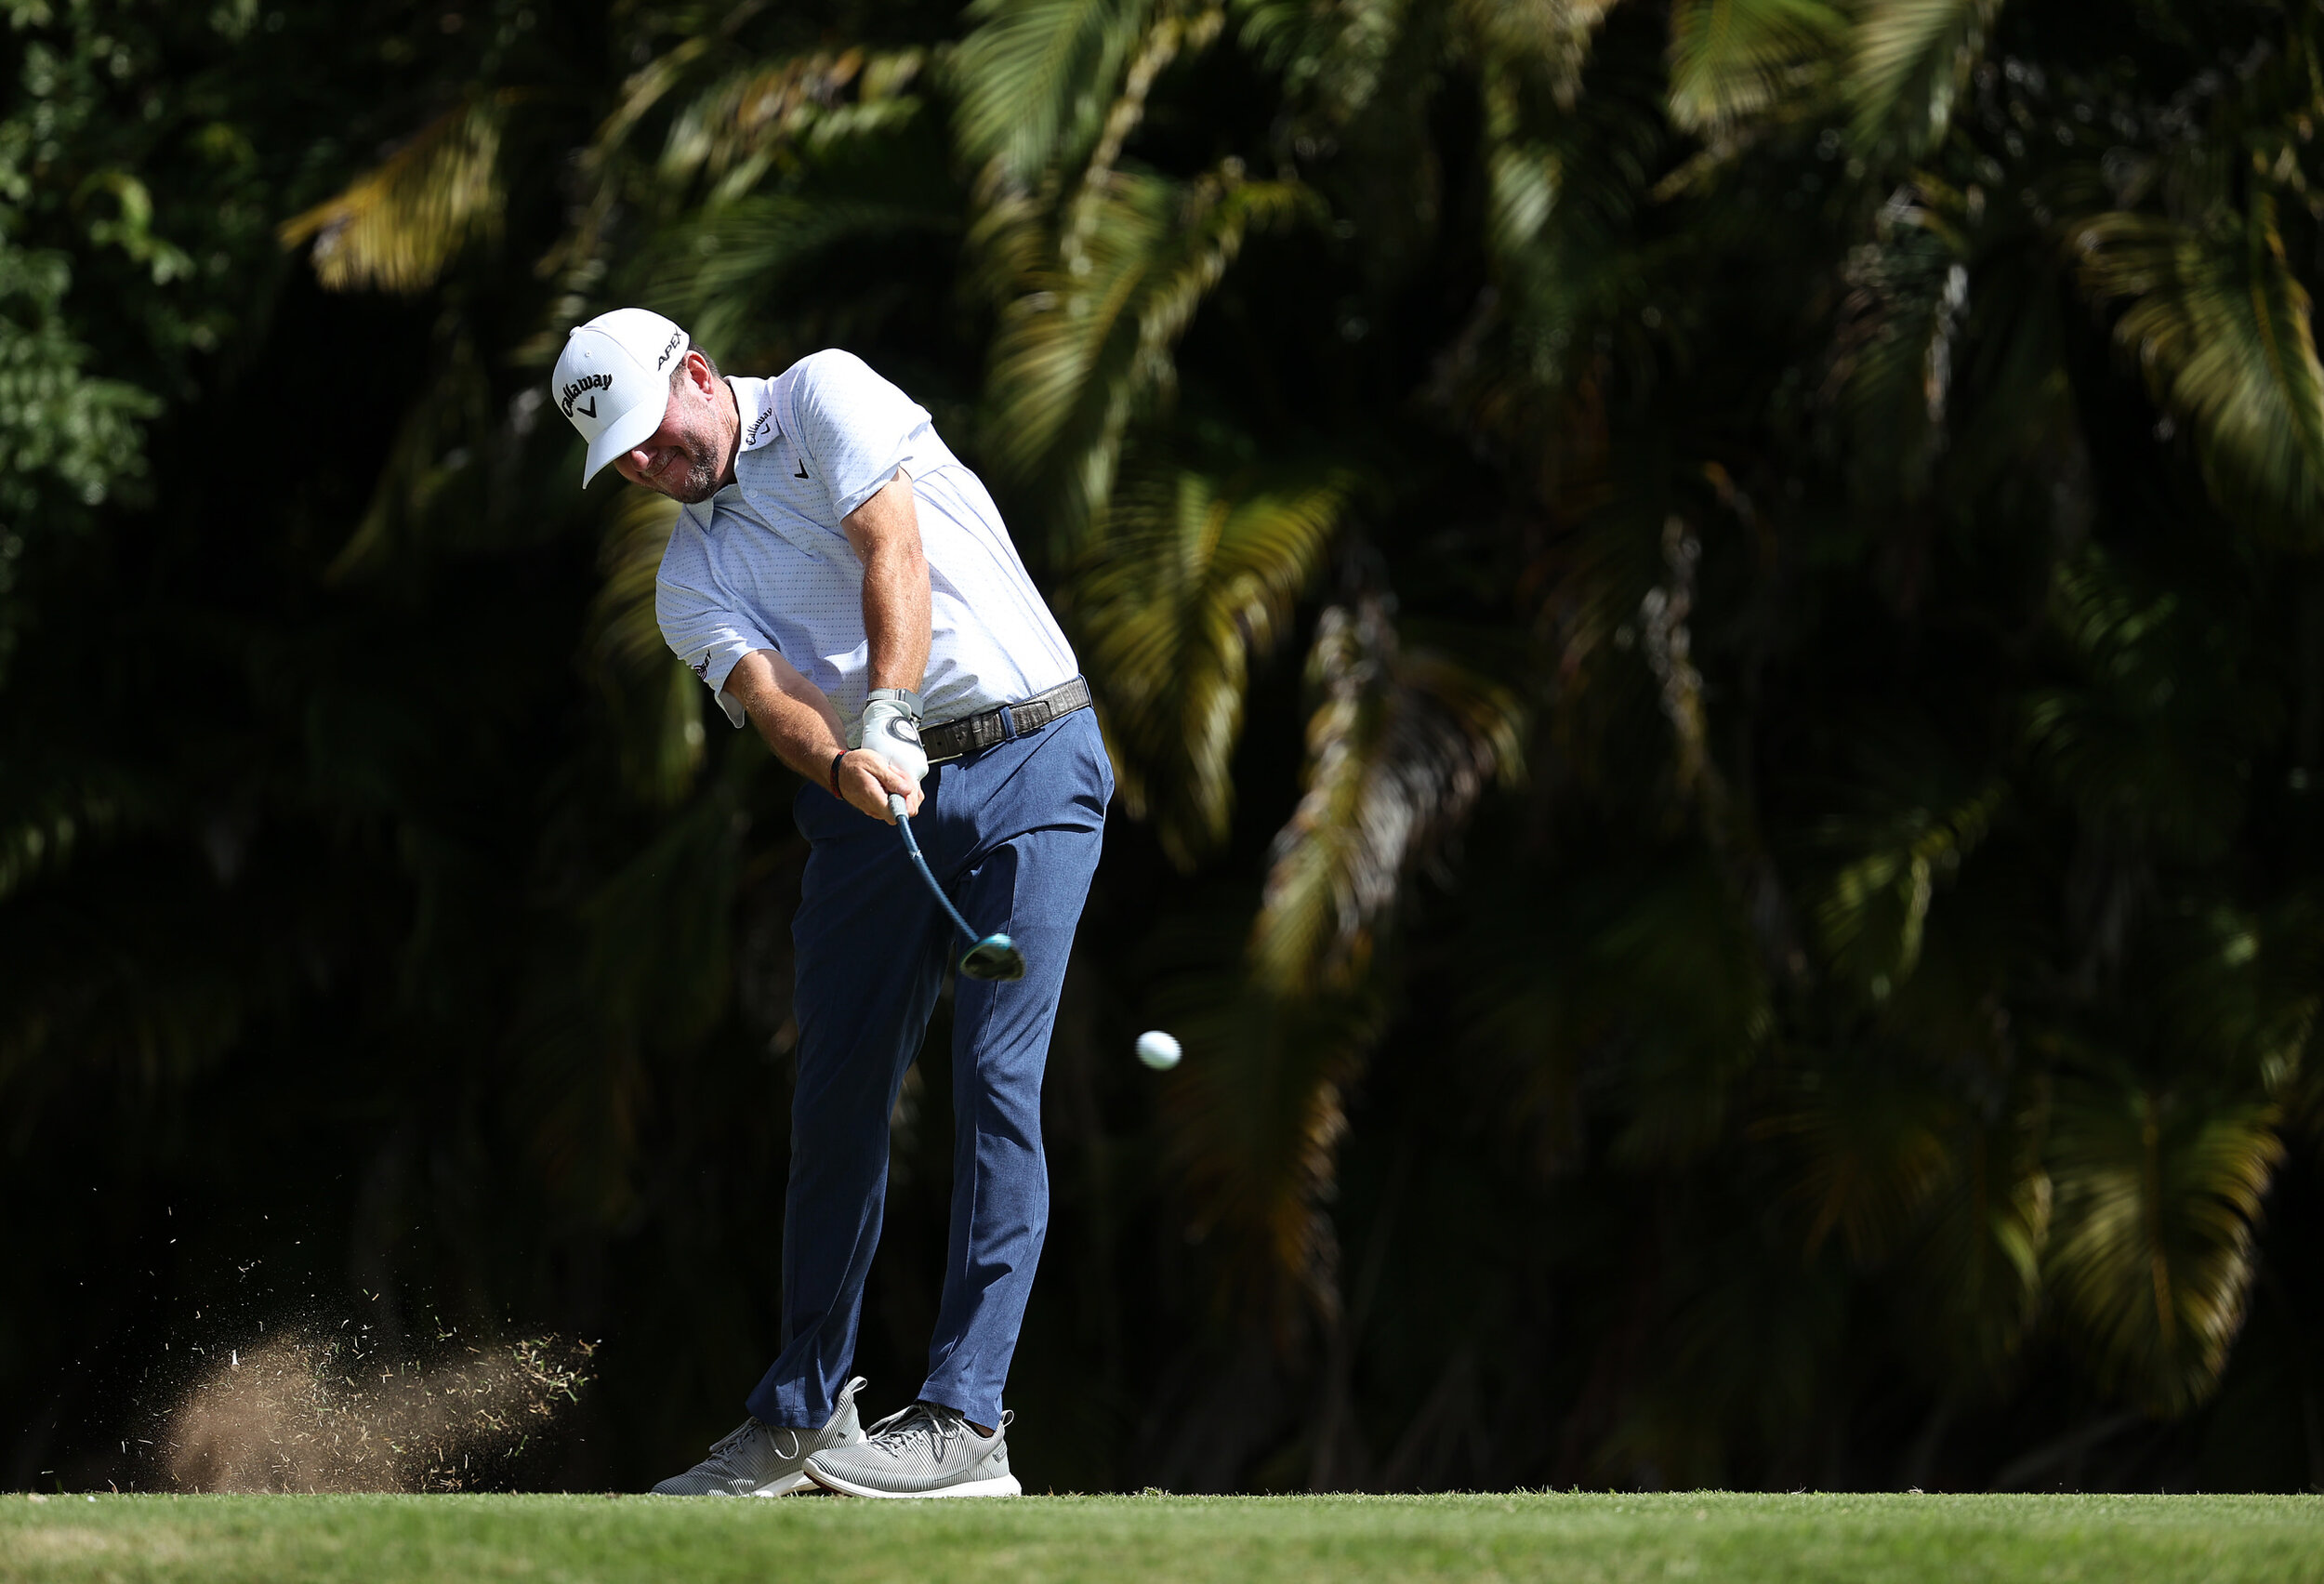  RIO GRANDE, PUERTO RICO - FEBRUARY 25: Robert Garrigus plays his shot from the fourth tee during the first round of the Puerto Rico Open at Grand Reserve Country Club on February 25, 2021 in Rio Grande, Puerto Rico.  (Photo by Andy Lyons/Getty Image